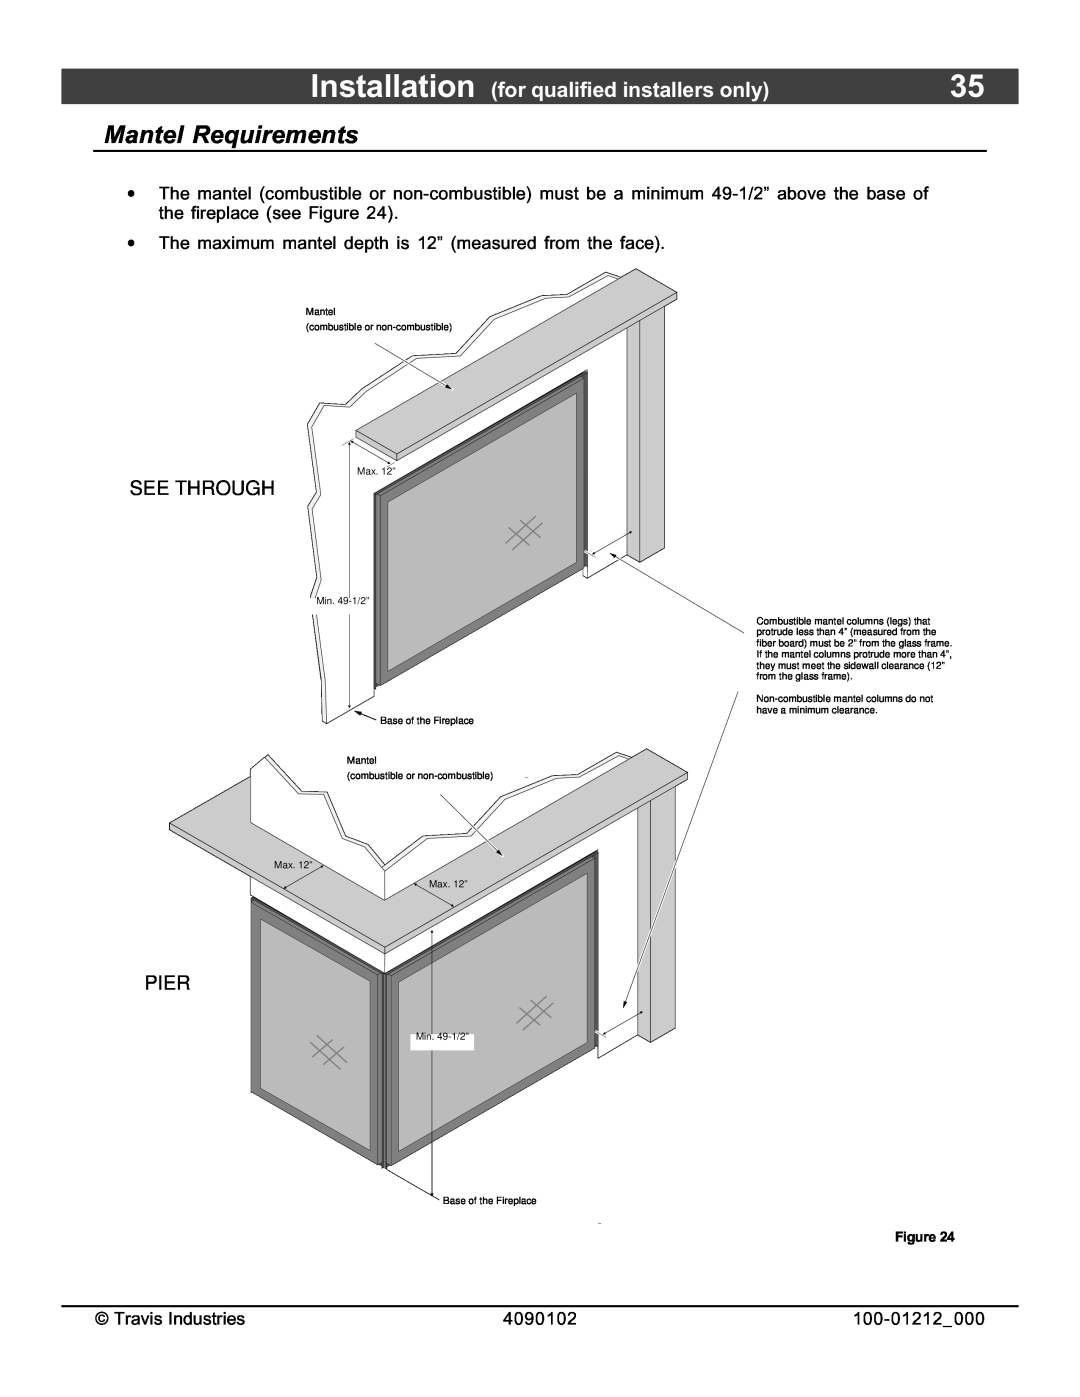 FireplaceXtrordinair 36CF Mantel Requirements, See Through, Pier, Installation for qualified installers only 